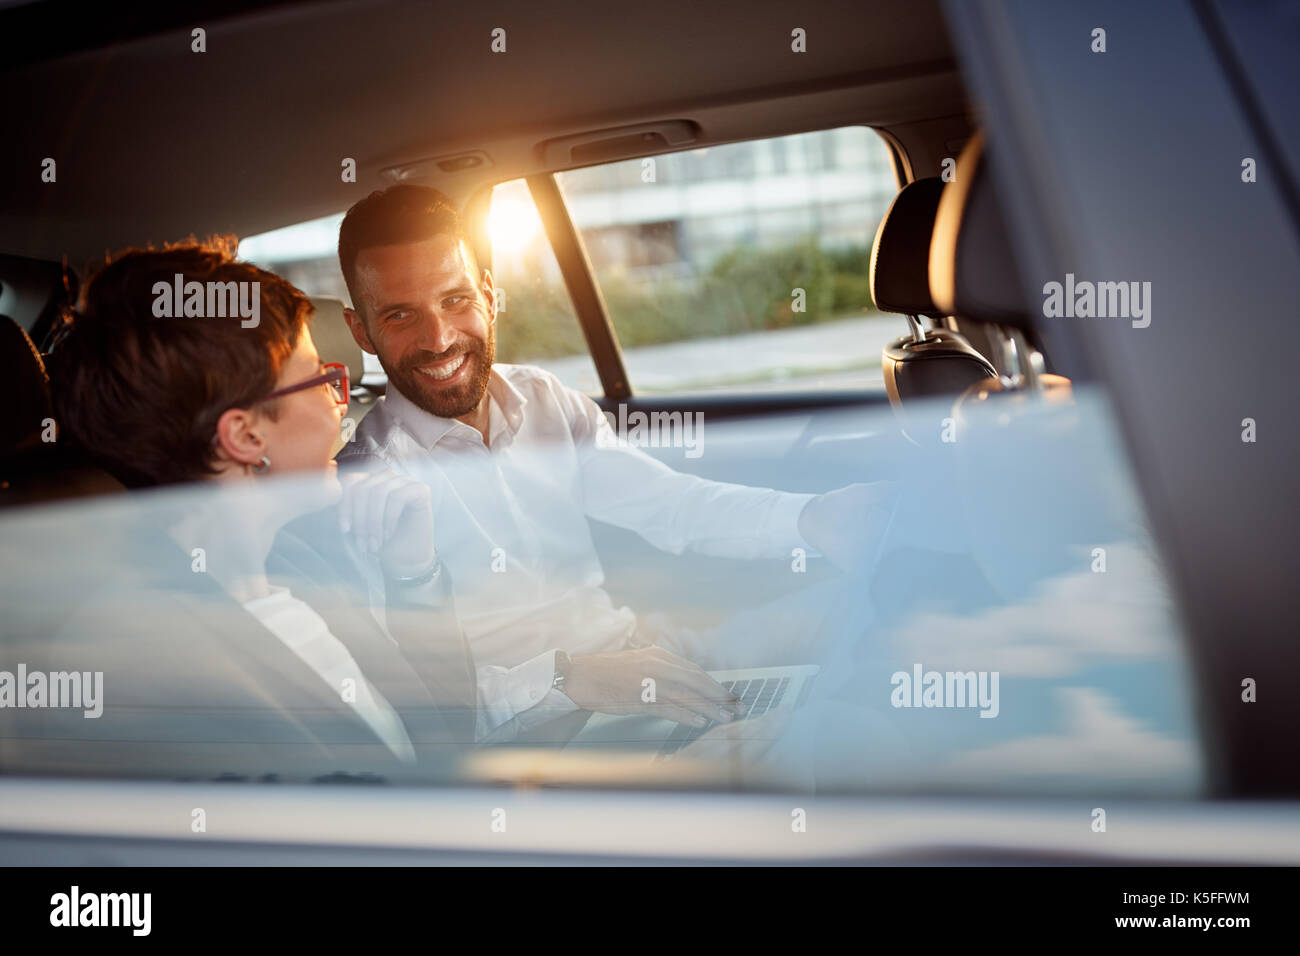 Smiling business people working in backseat of car Banque D'Images